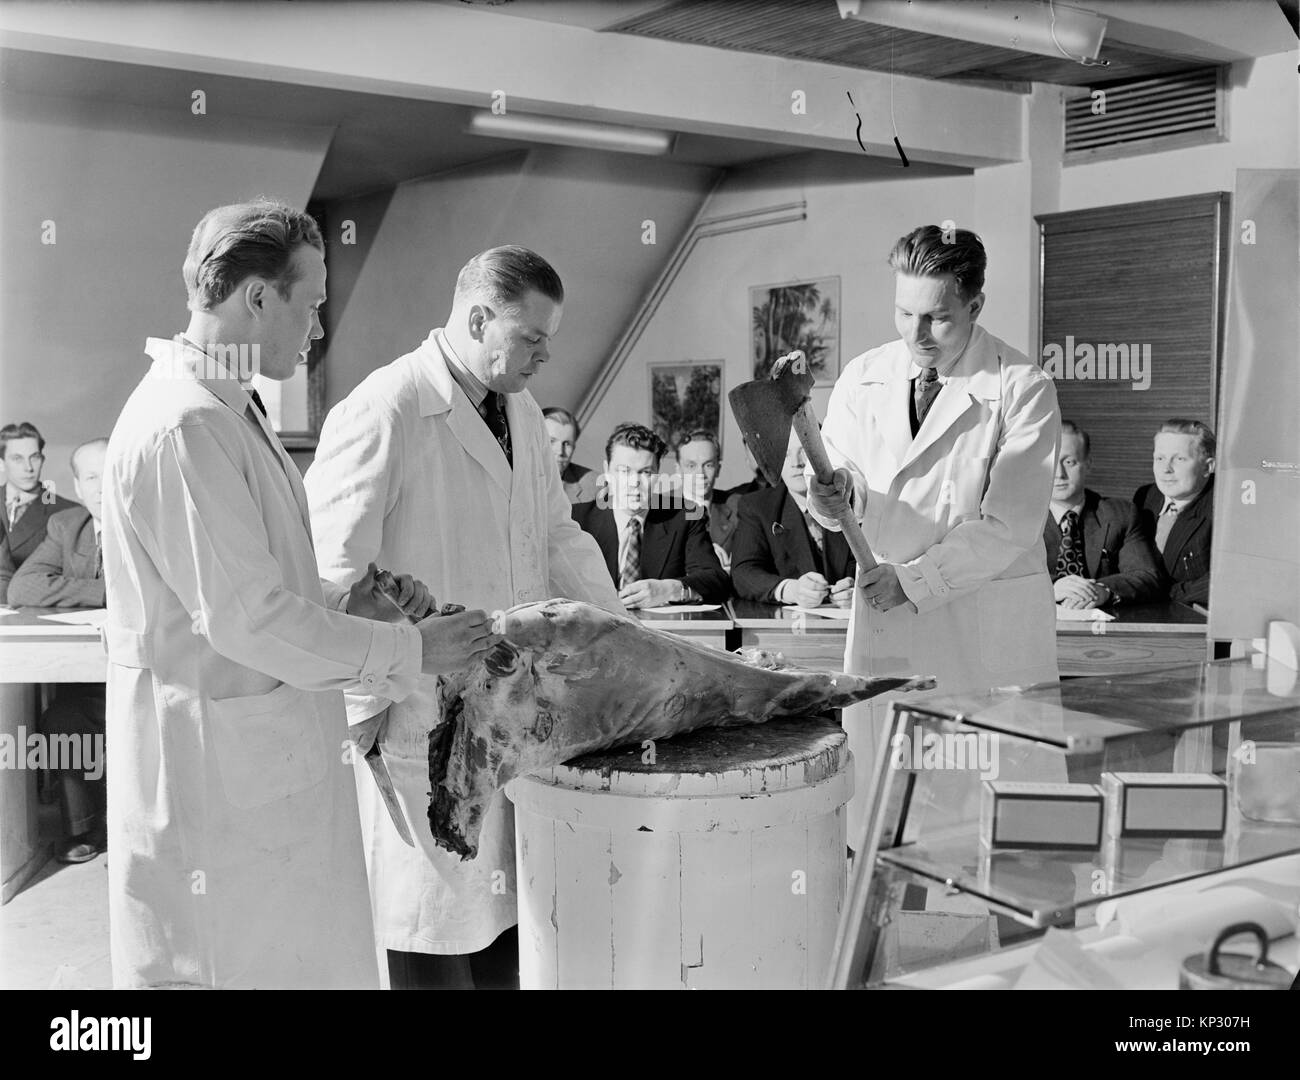 College butchery demonstration by three butchers in white coats using an axe to dismember a pig male students watching, Helsinki, Finland 1950s Stock Photo